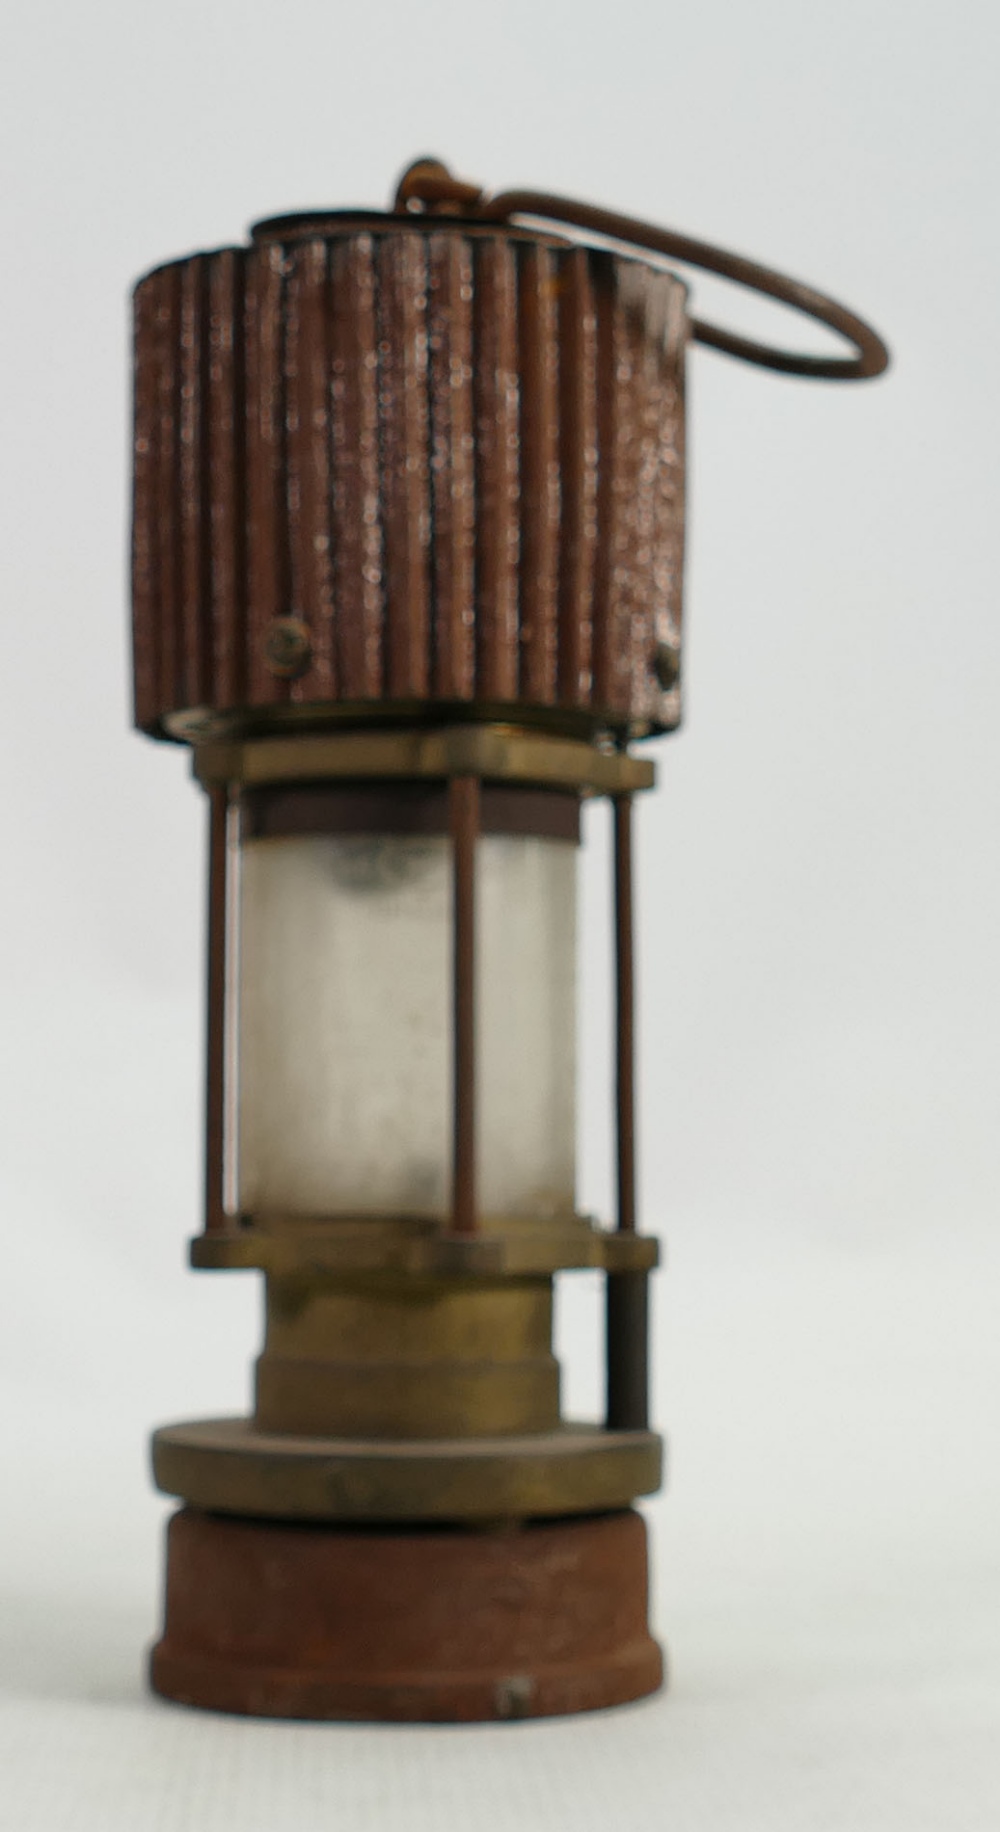 Hailwoods type brass Miners safety lamp: